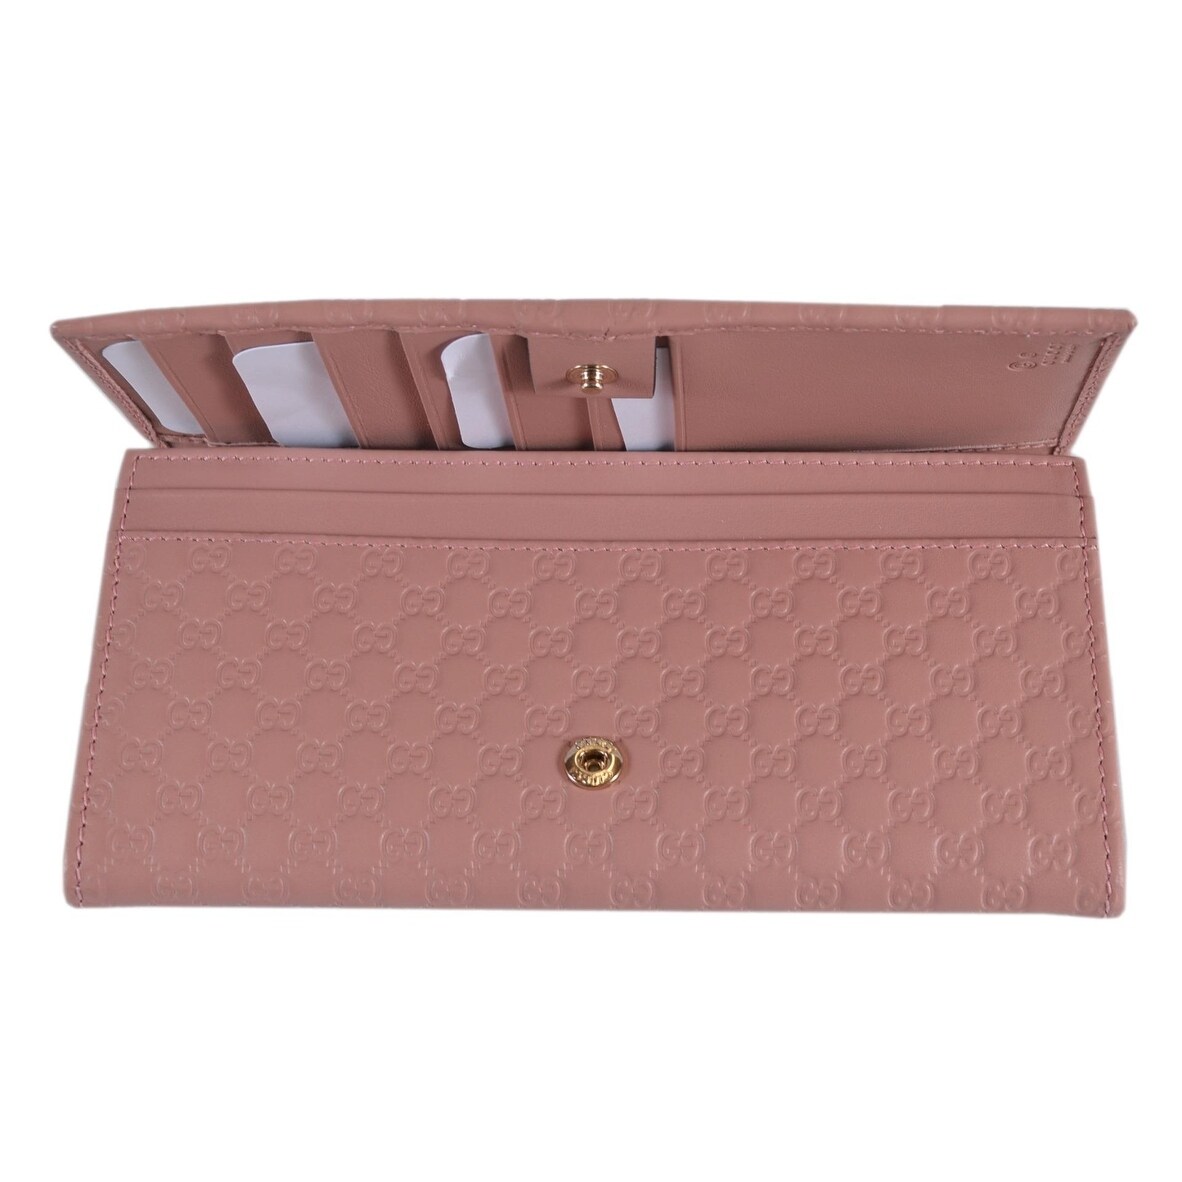 Gucci Women's 449396 Soft Pink Leather 